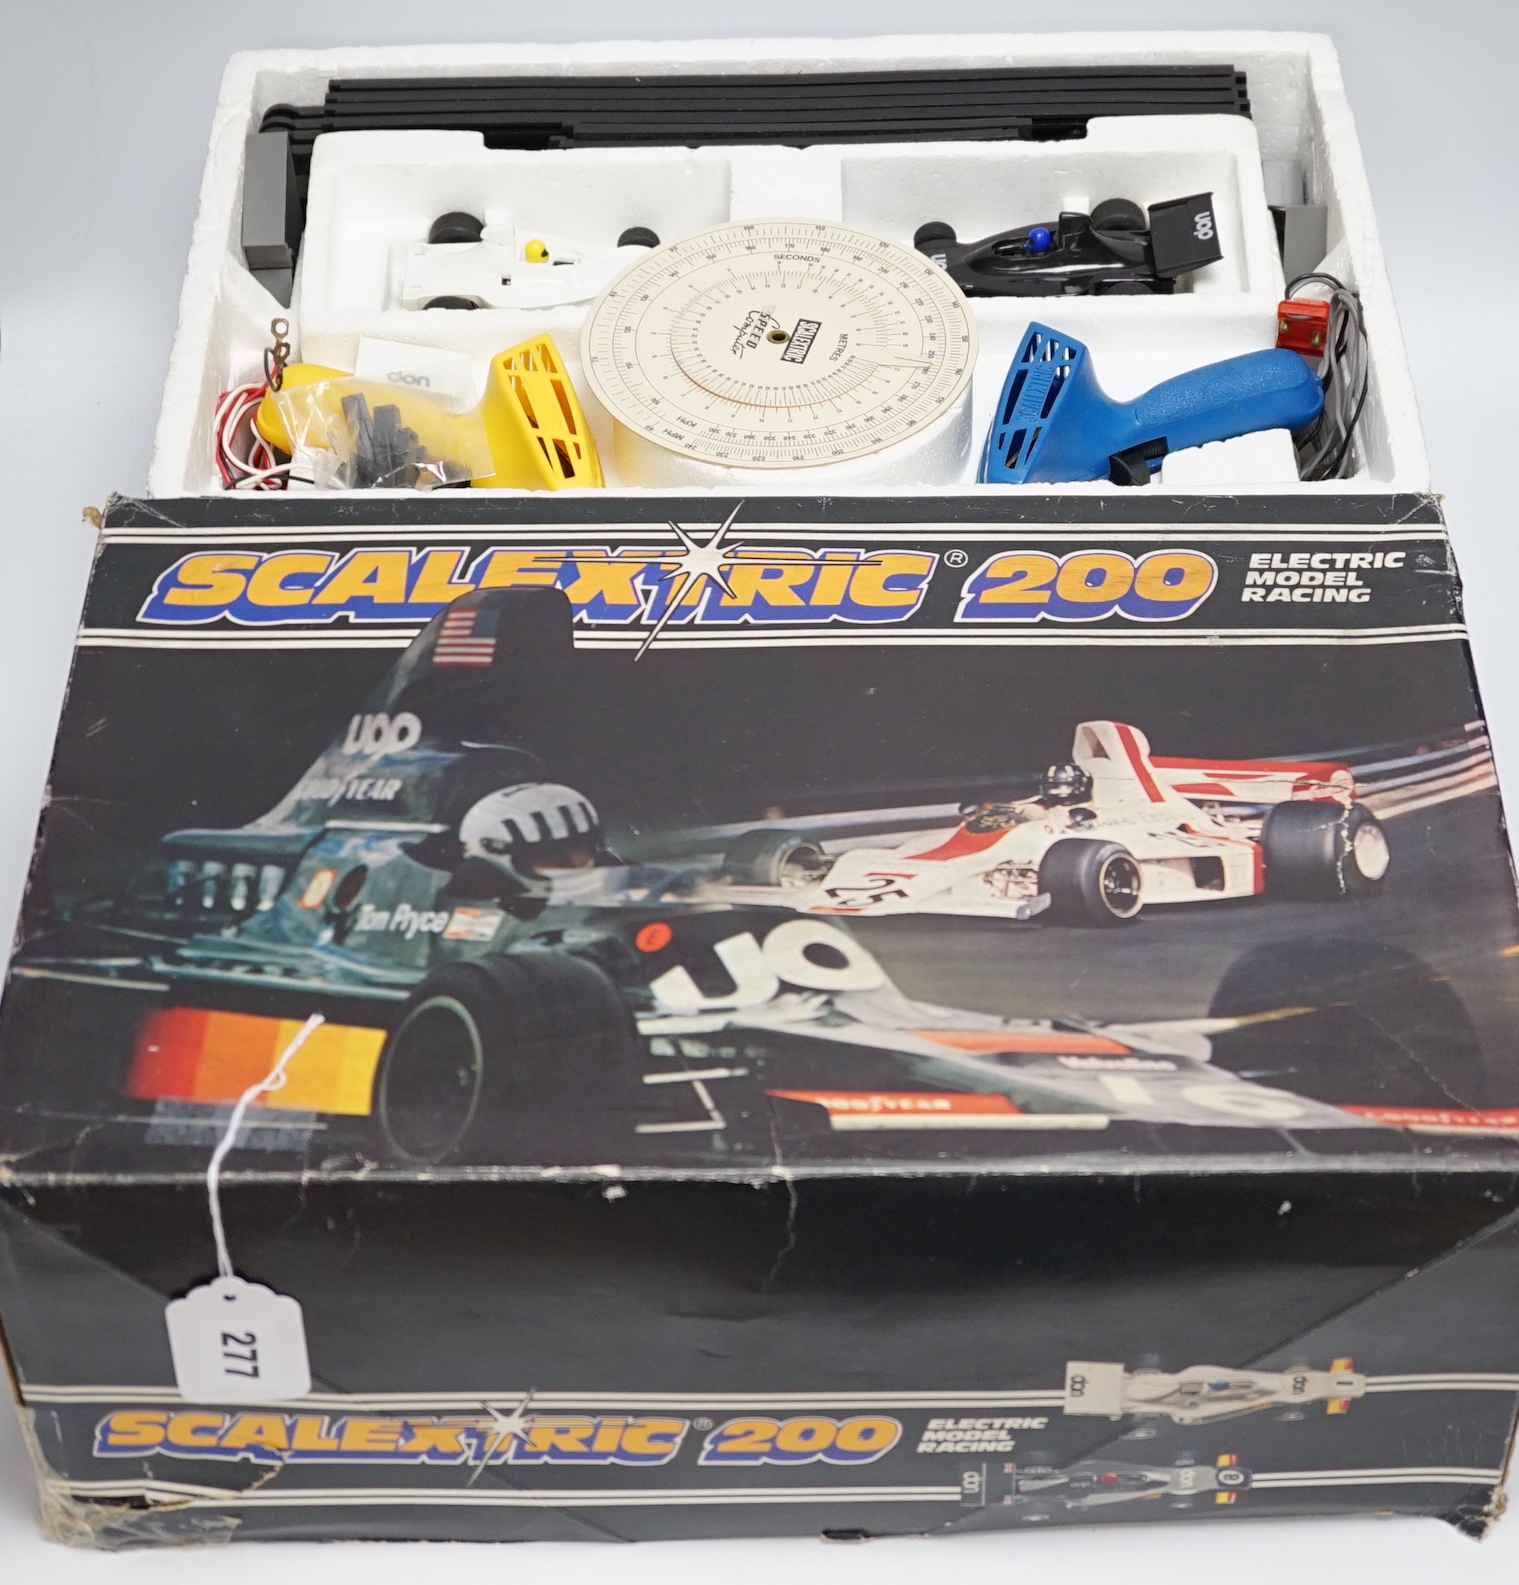 A Scalextric 200 set, comprising of two cars, controllers, track sections, etc.